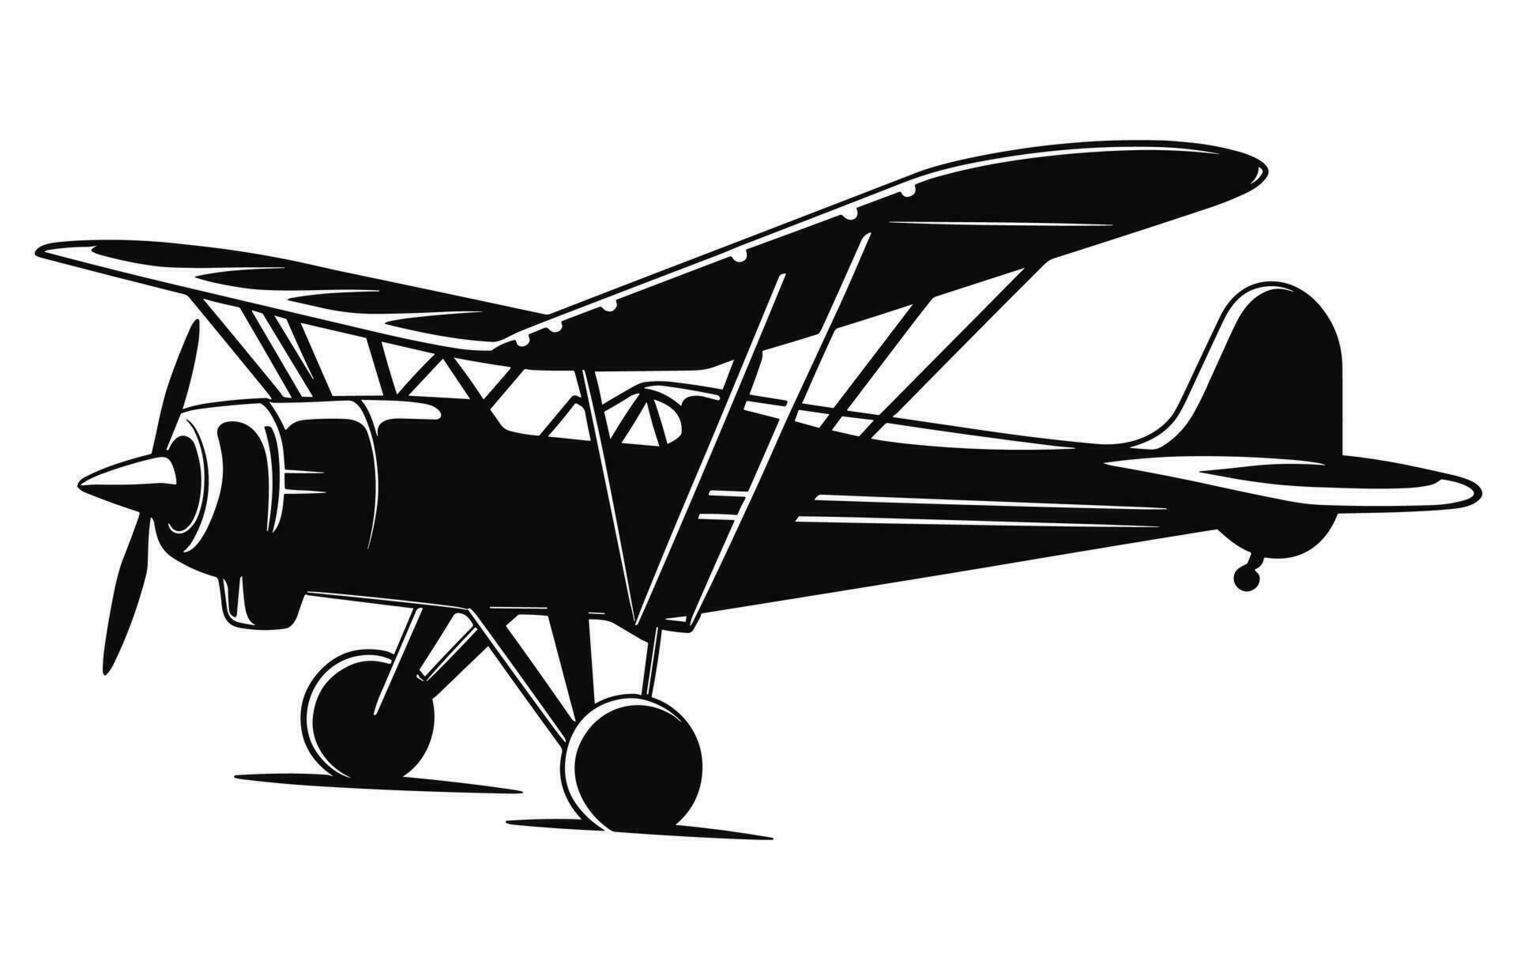 A Biplane Silhouette Clipart isolated on a white background, Airplane black vector design